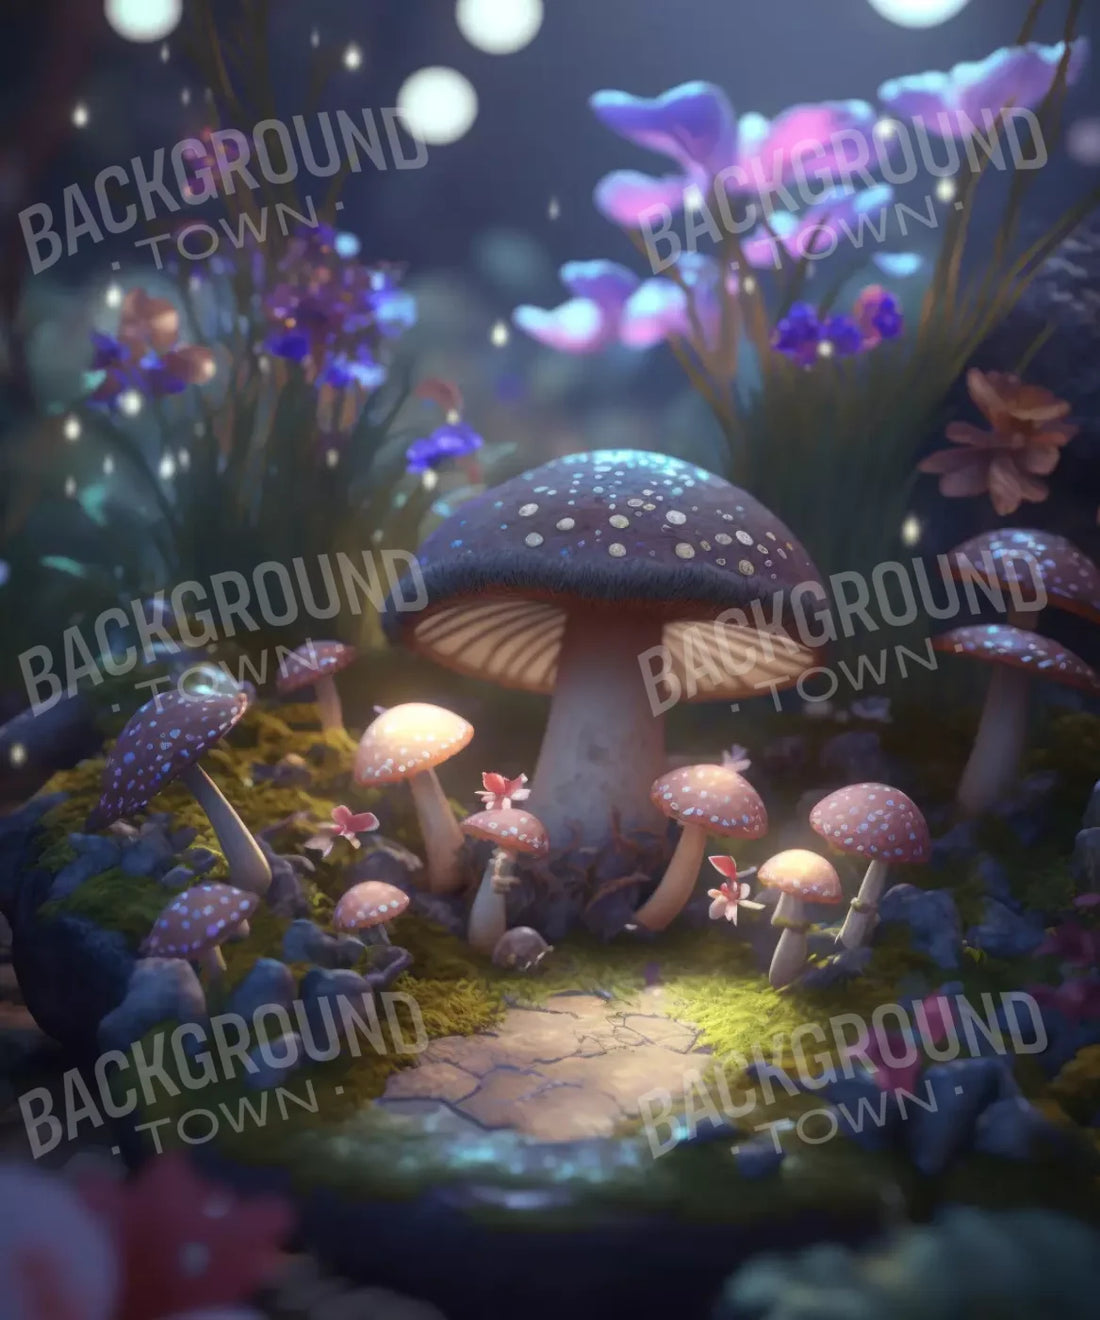 [Fairy] [mushrooms] [nighttime] Backdrop for Photography